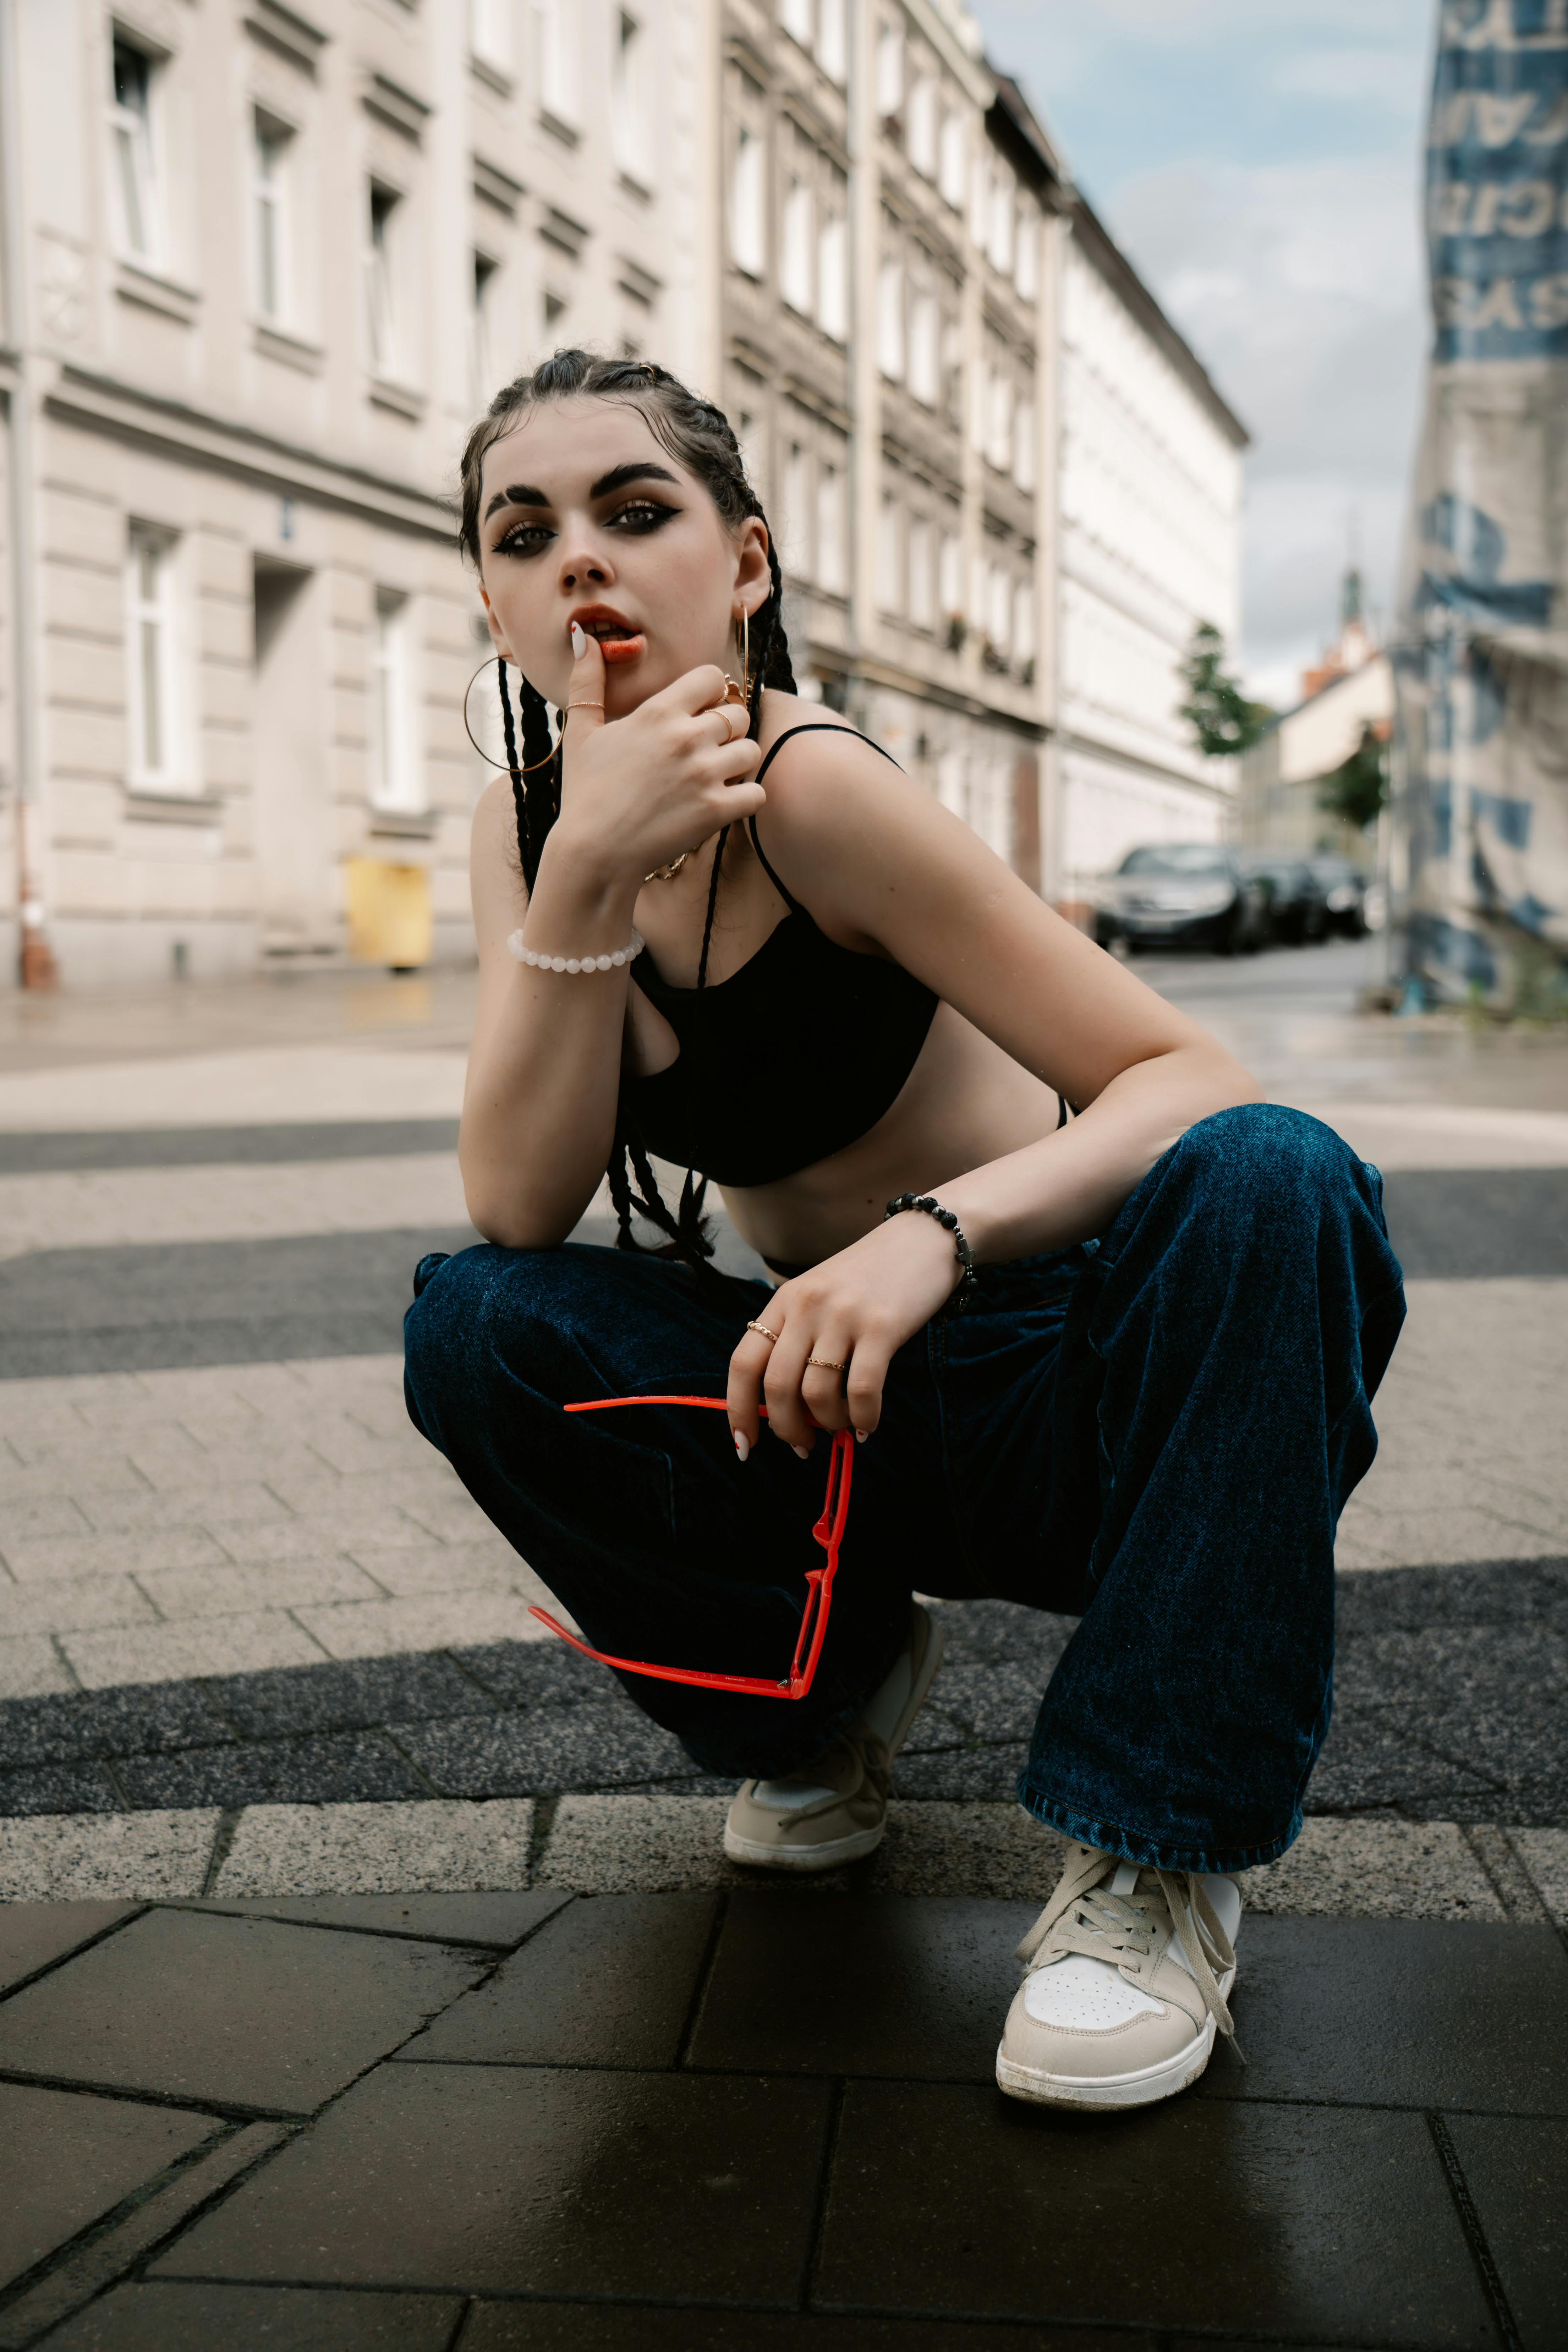 Outfit & Poses Inspo for Street Style Photoshoot 📸 | Gallery posted by  nessaliem | Lemon8